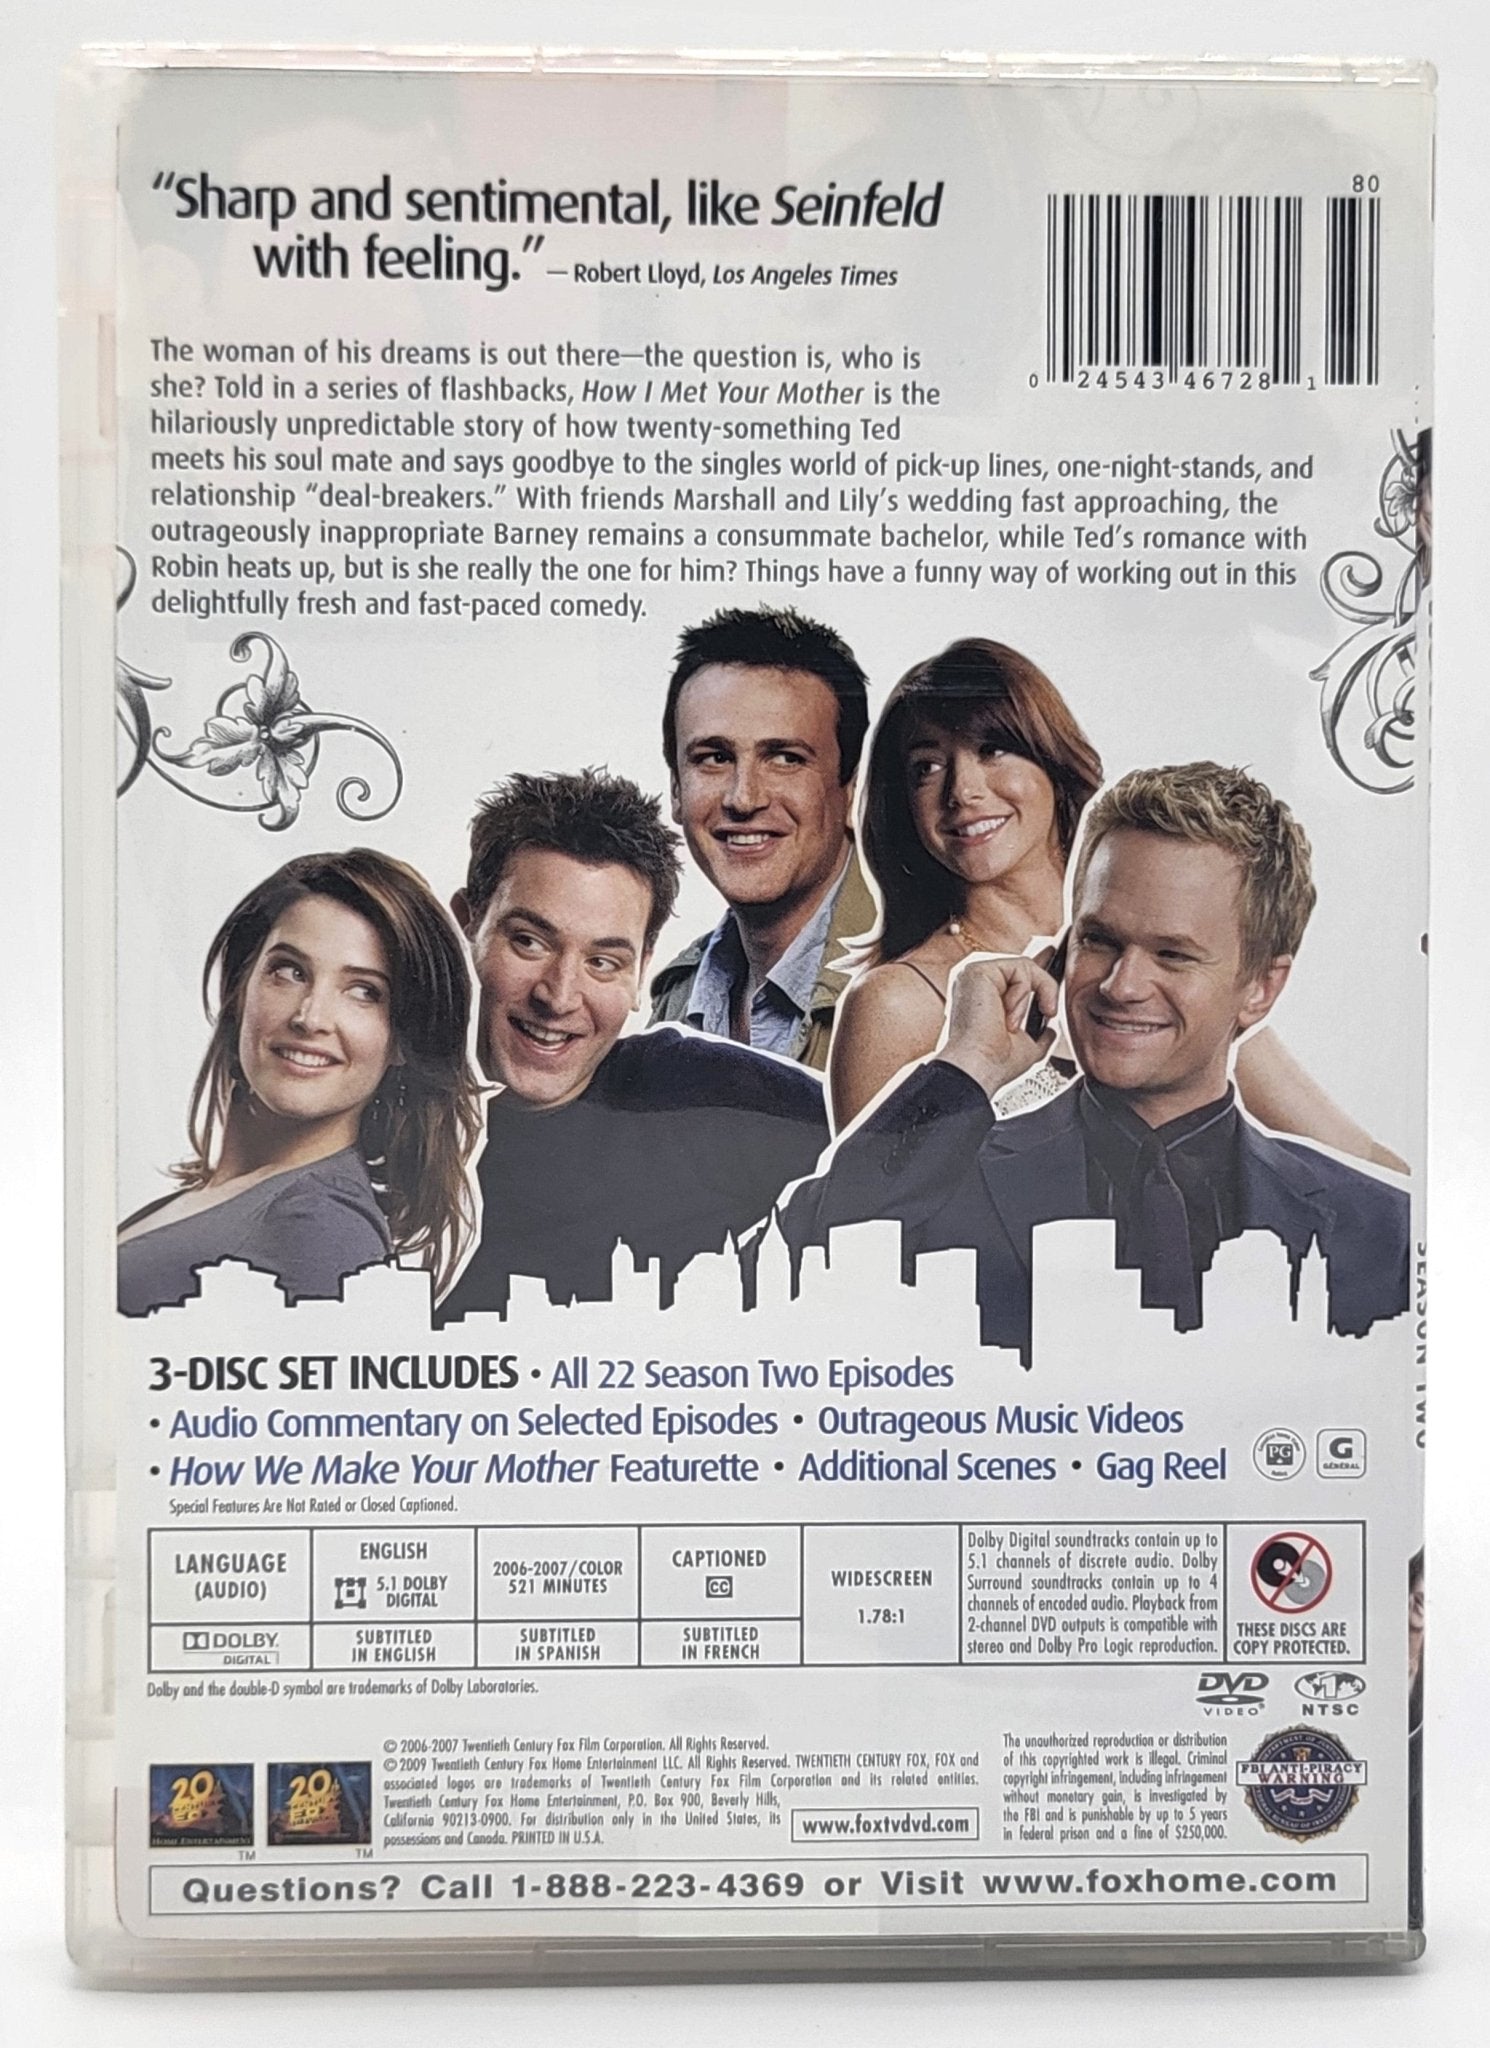 20th Century Fox Home Entertainment - How I Met Your Mother | DVD | The Complete Season Two - 3 Disc Set - DVD - Steady Bunny Shop